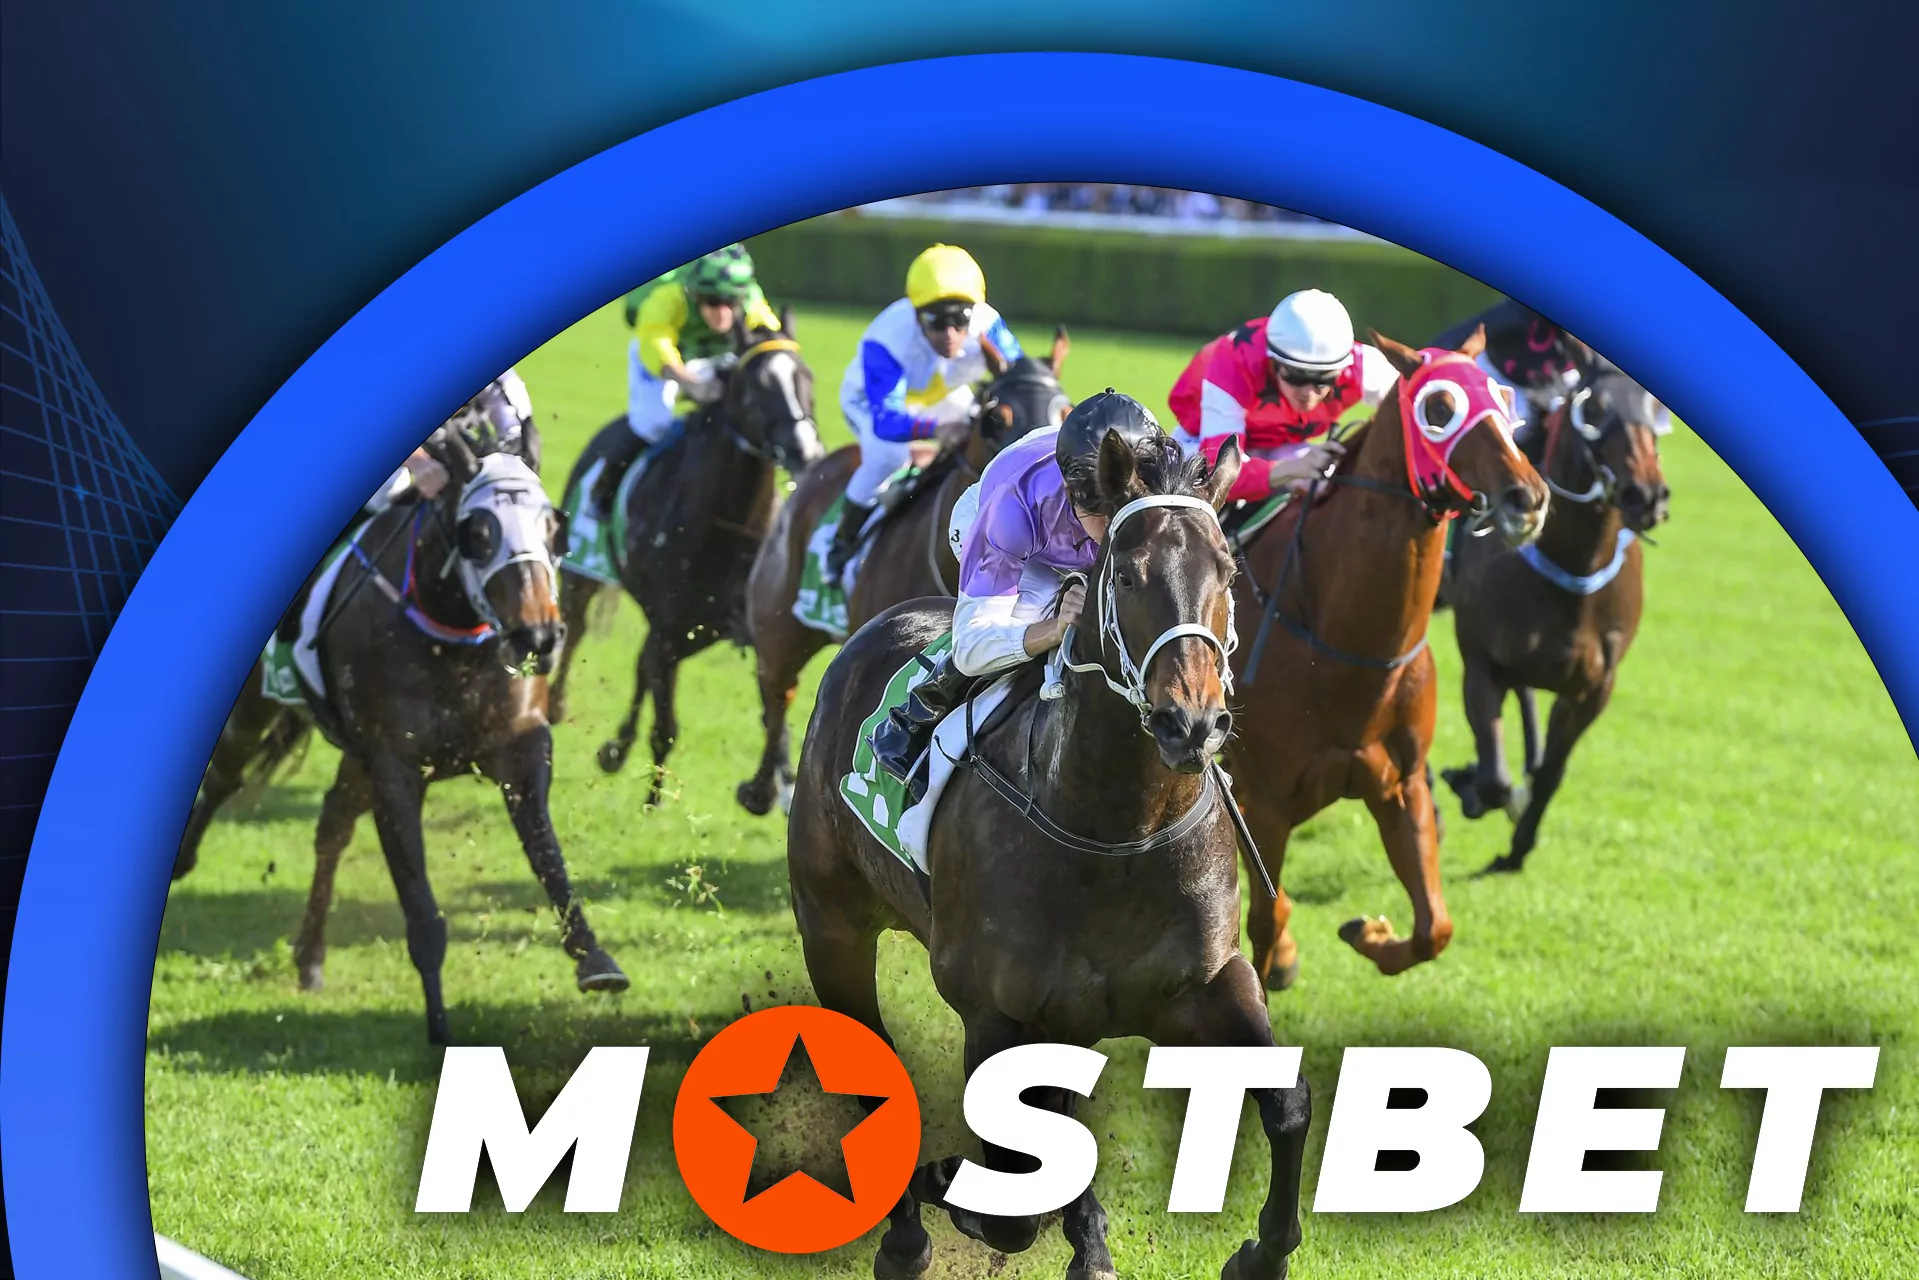 Horse racing betting at Mostbet.